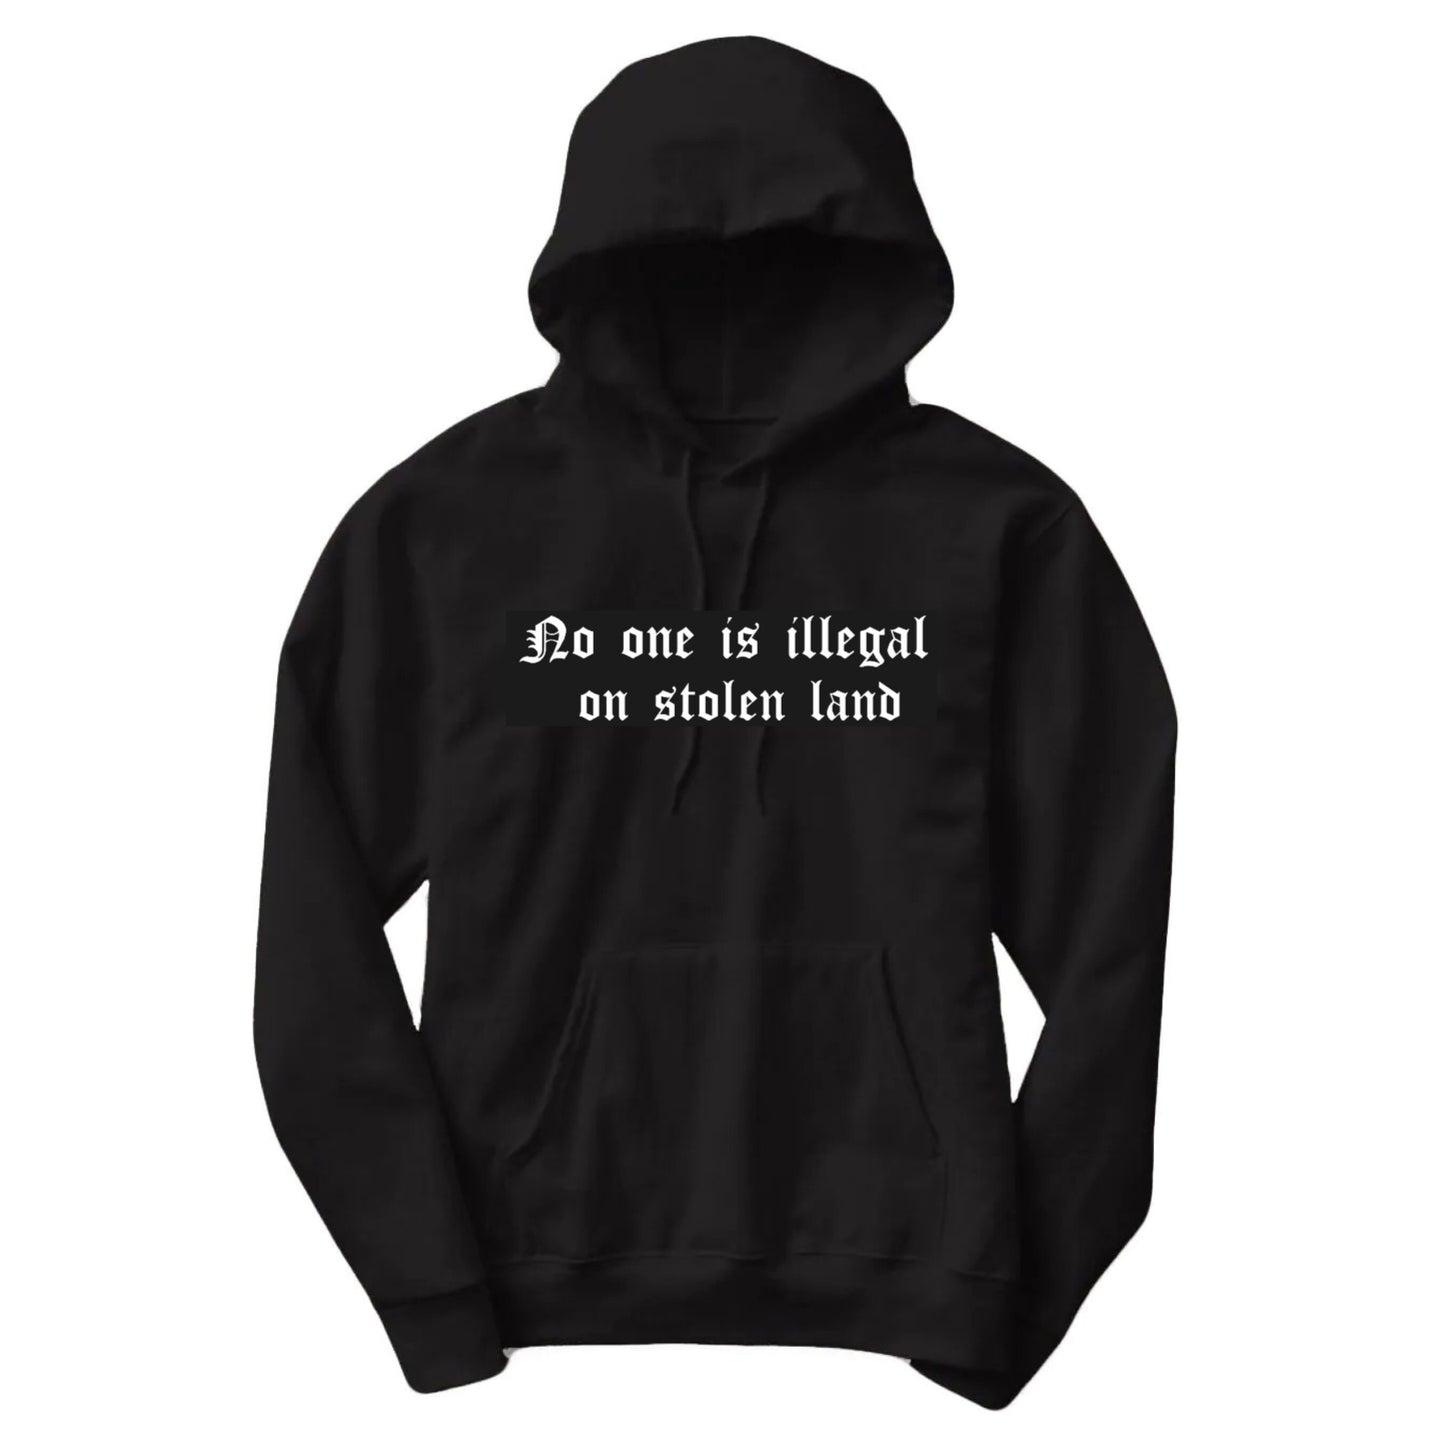 No one is illegal on stolen land hoodie